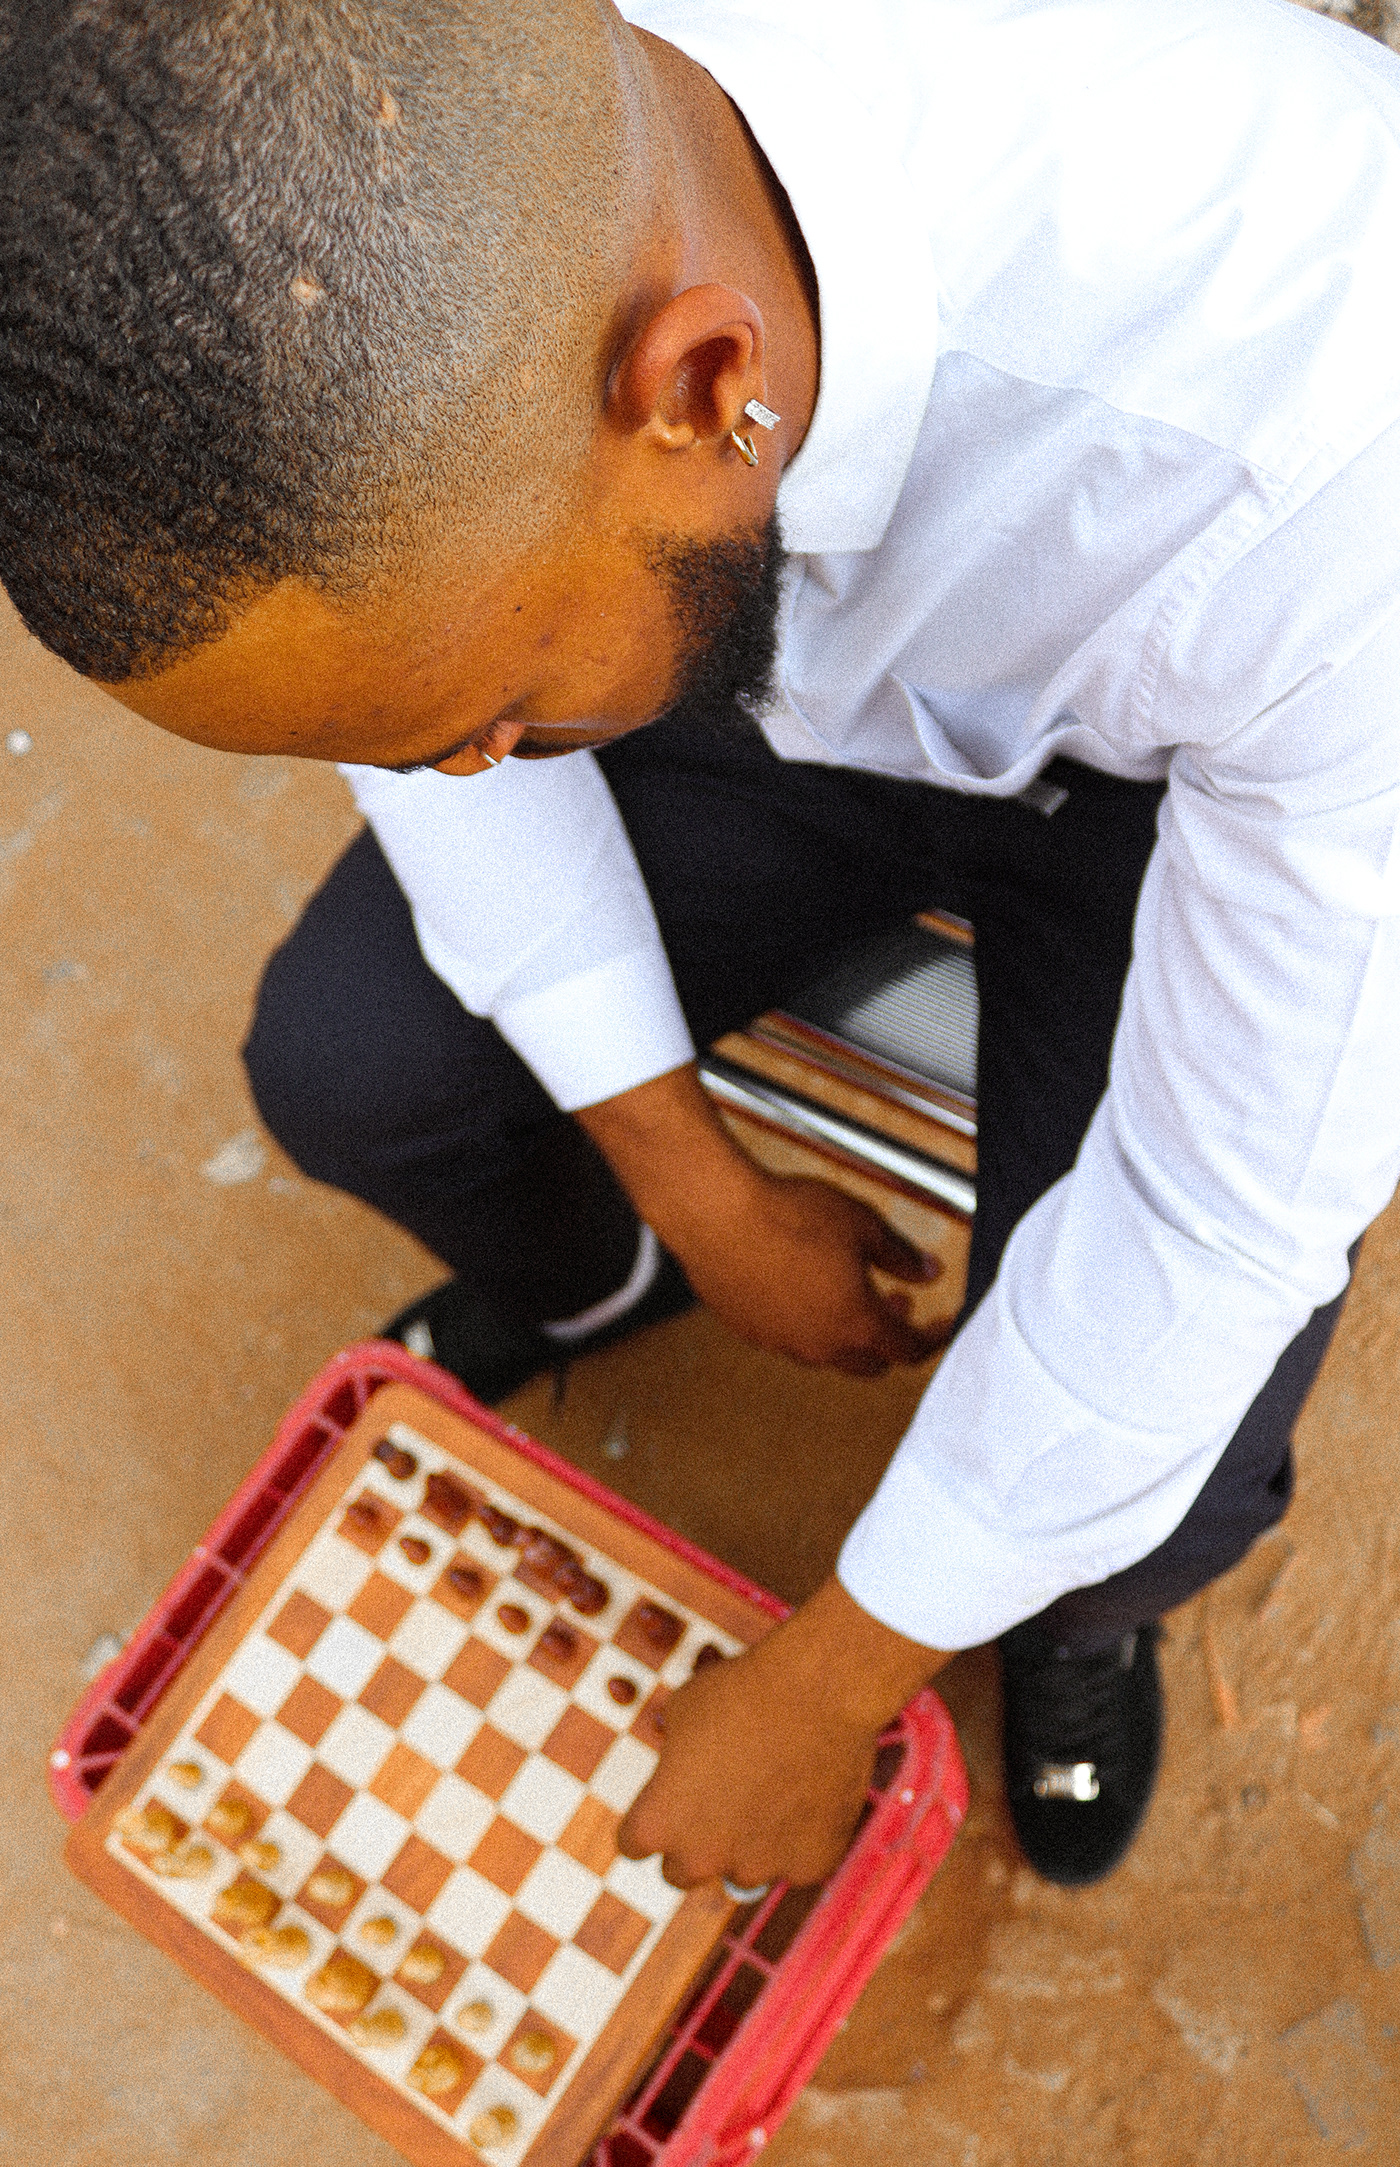 SOWETO chess gangster ghetto vintage grainy texture smartcasual